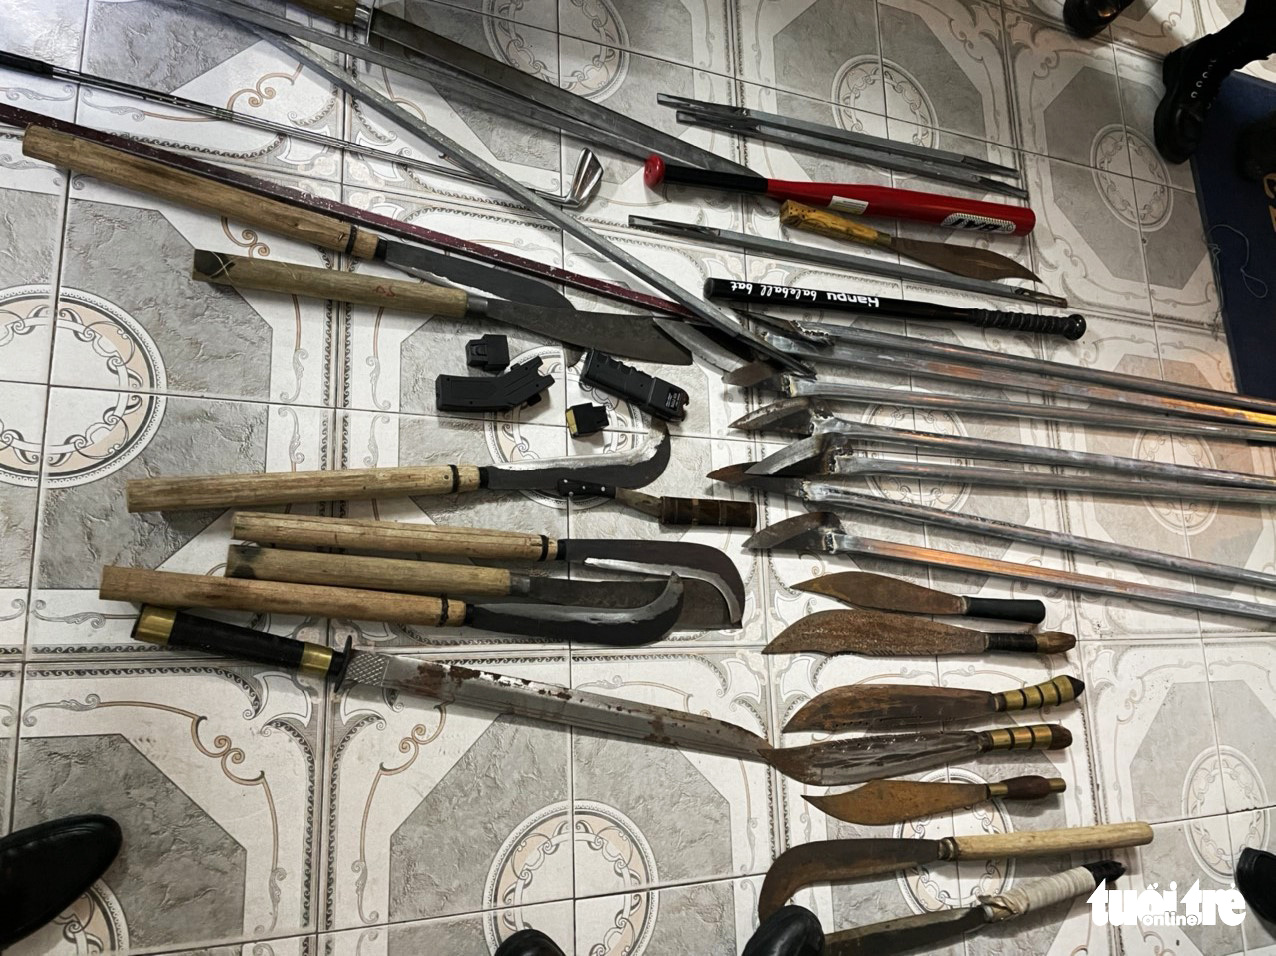 A large number of weapons are found at the headquarters of Phuc Cuong transport company in Thai Binh Province, Vietnam, December 14, 2020. Photo: Khanh Linh / Tuoi Tre